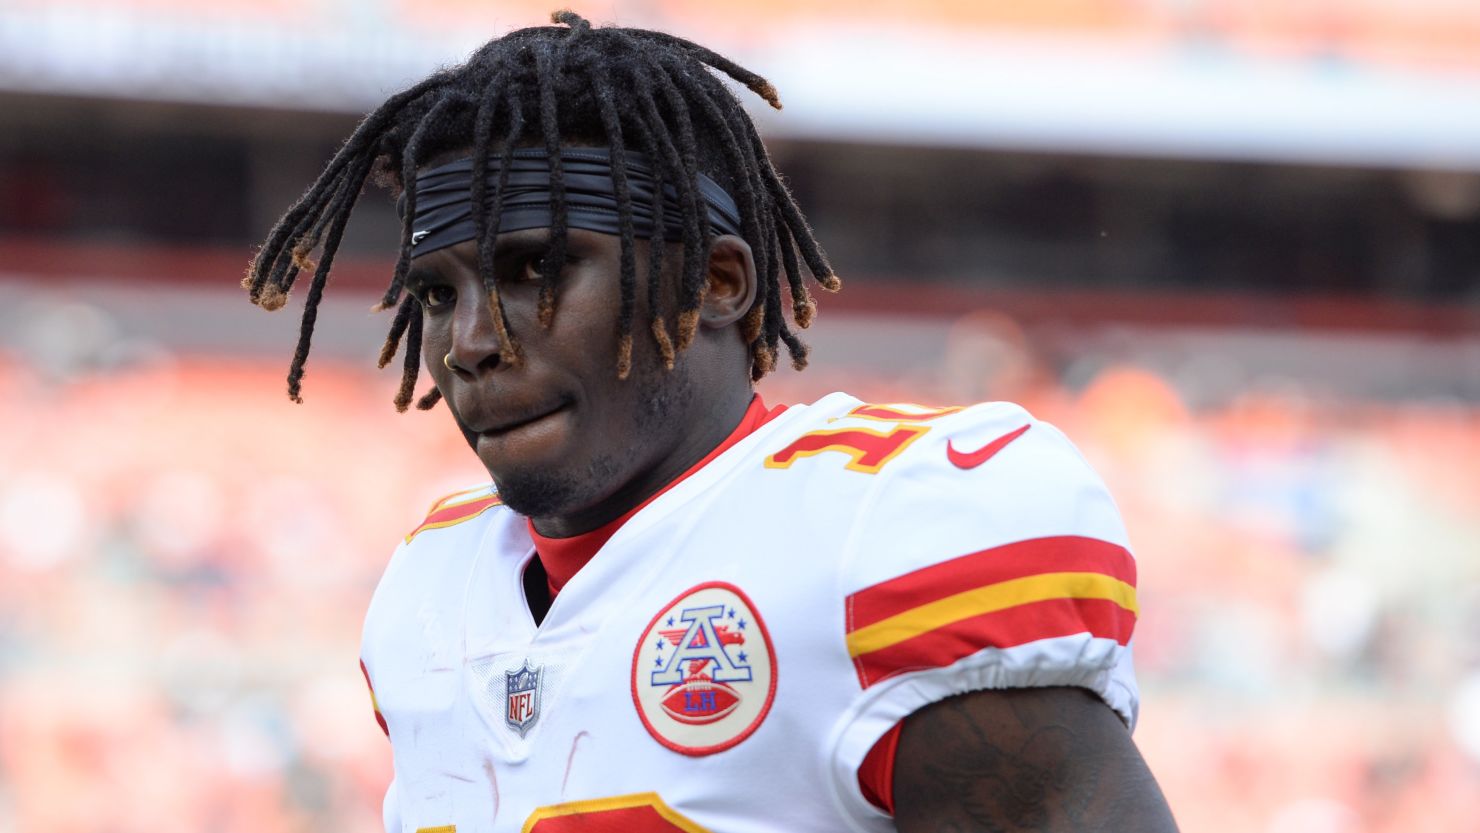 Tyreek Hill can join the Chiefs at training camp; veterans report July 26.